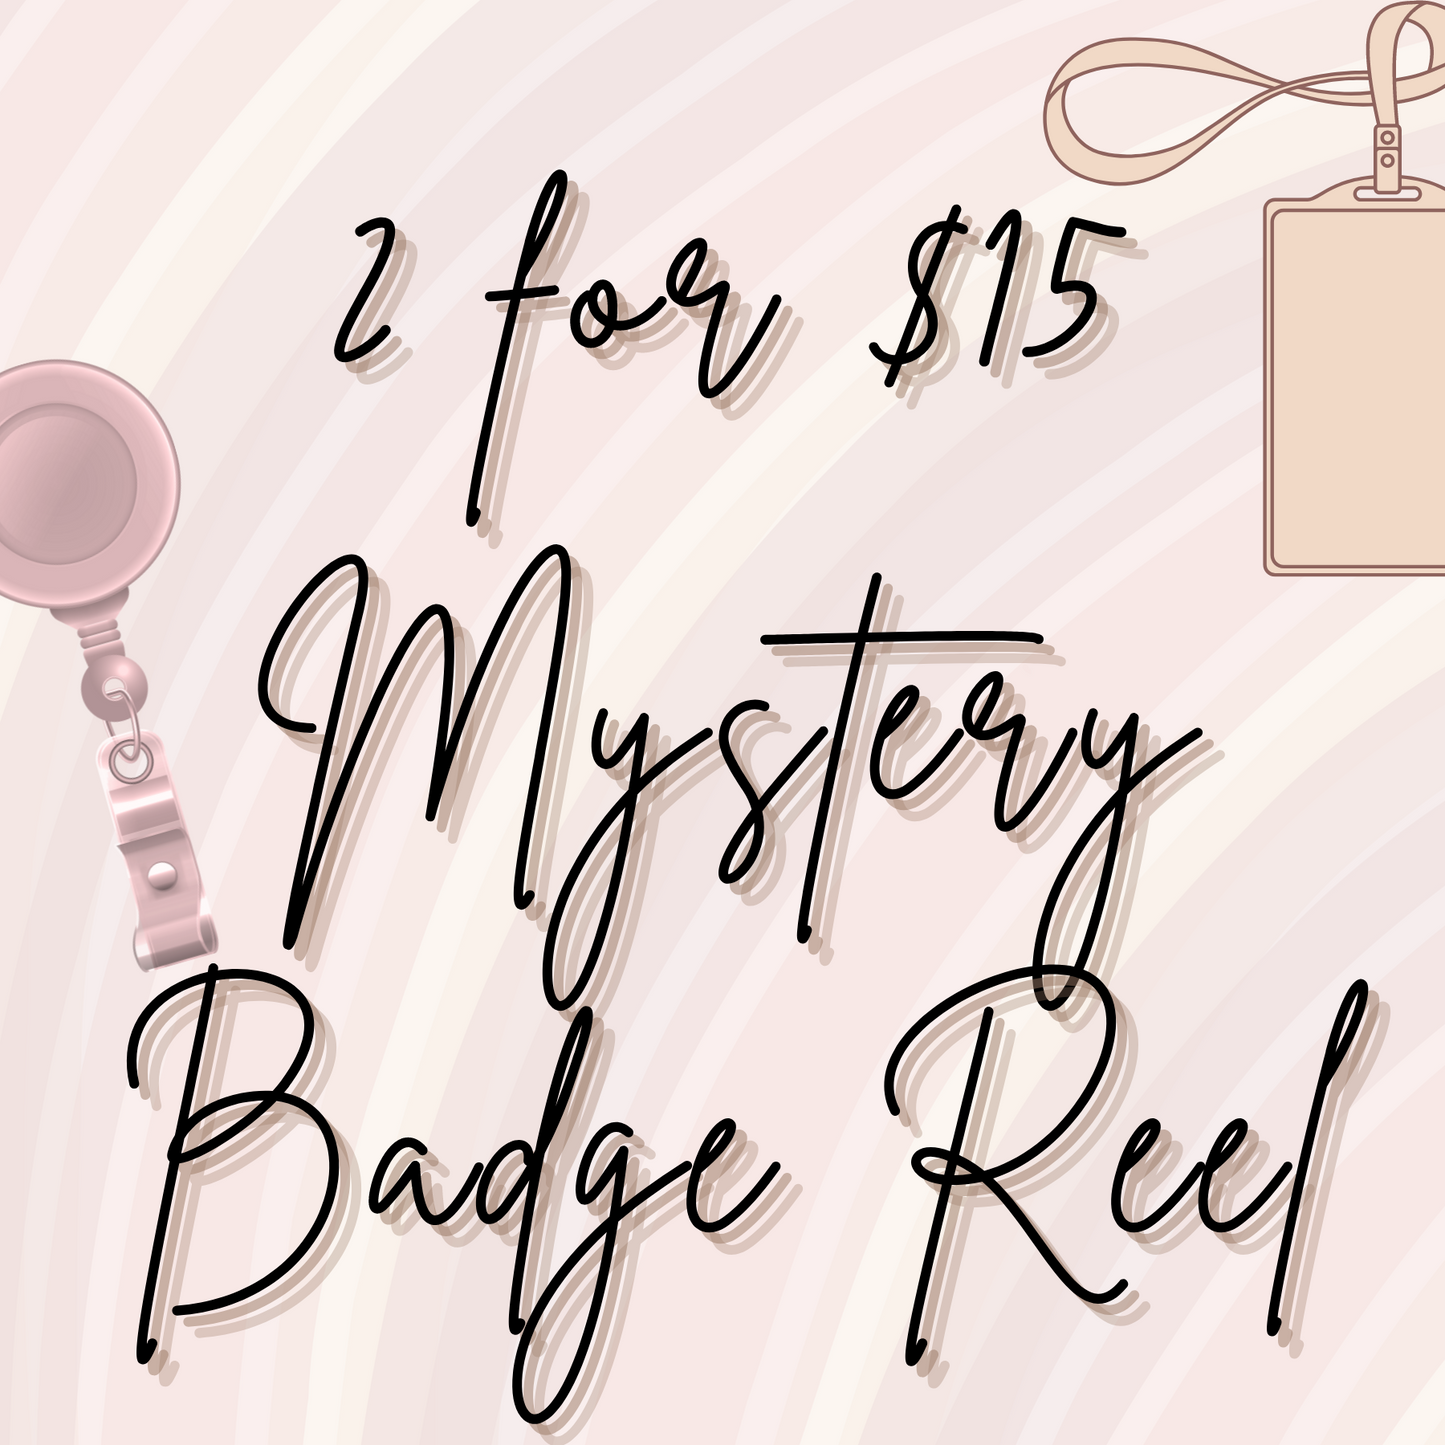 2 for $15 Mystery Badge Reel